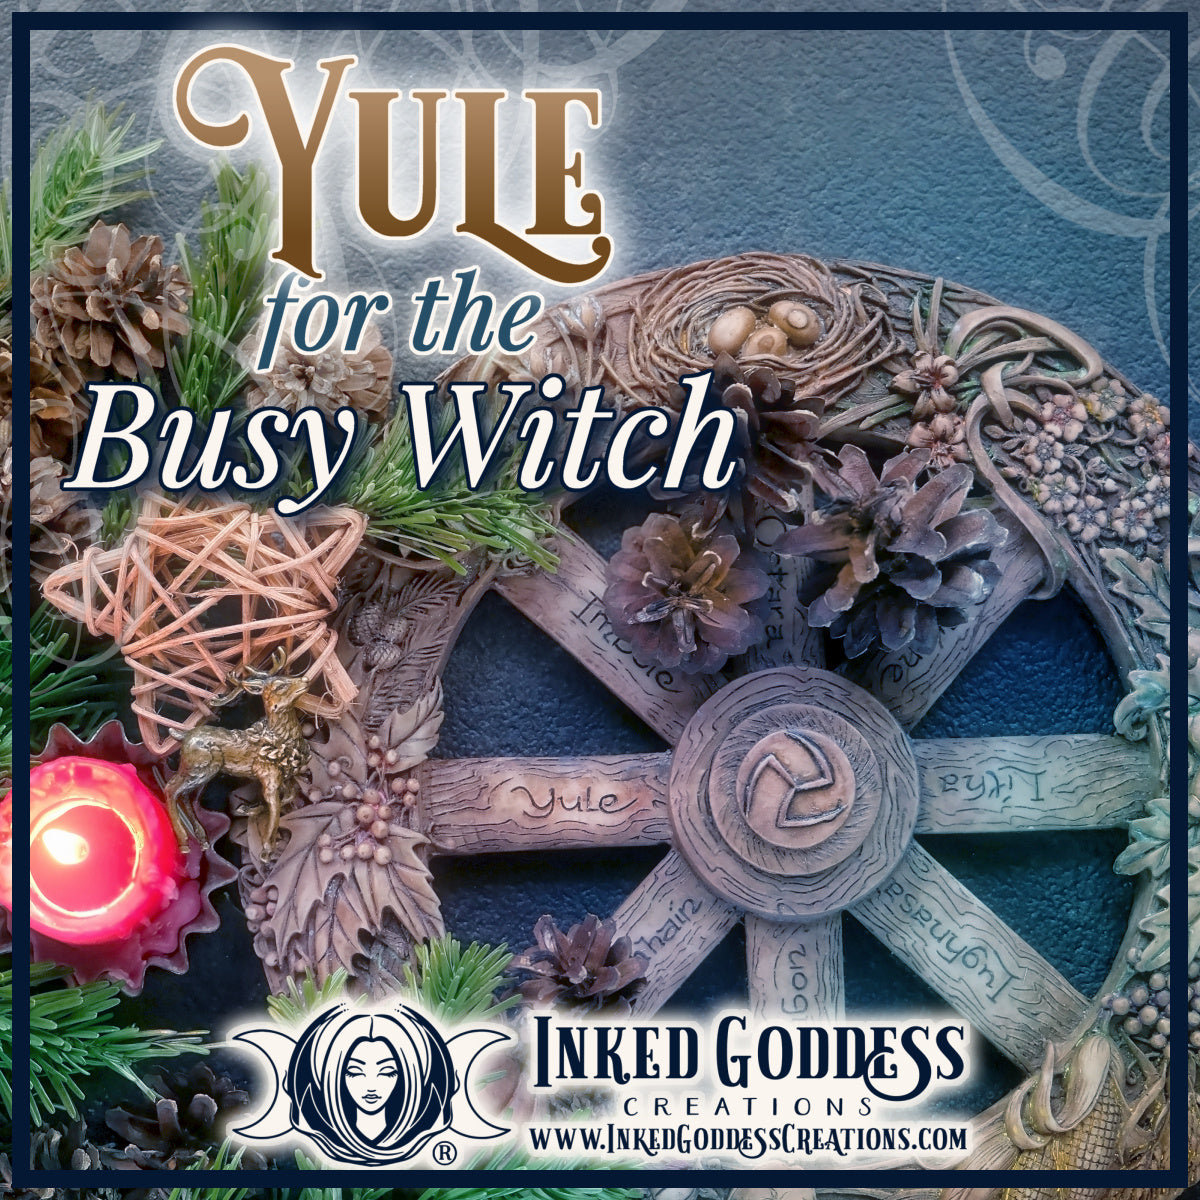 Yule for the Busy Witch